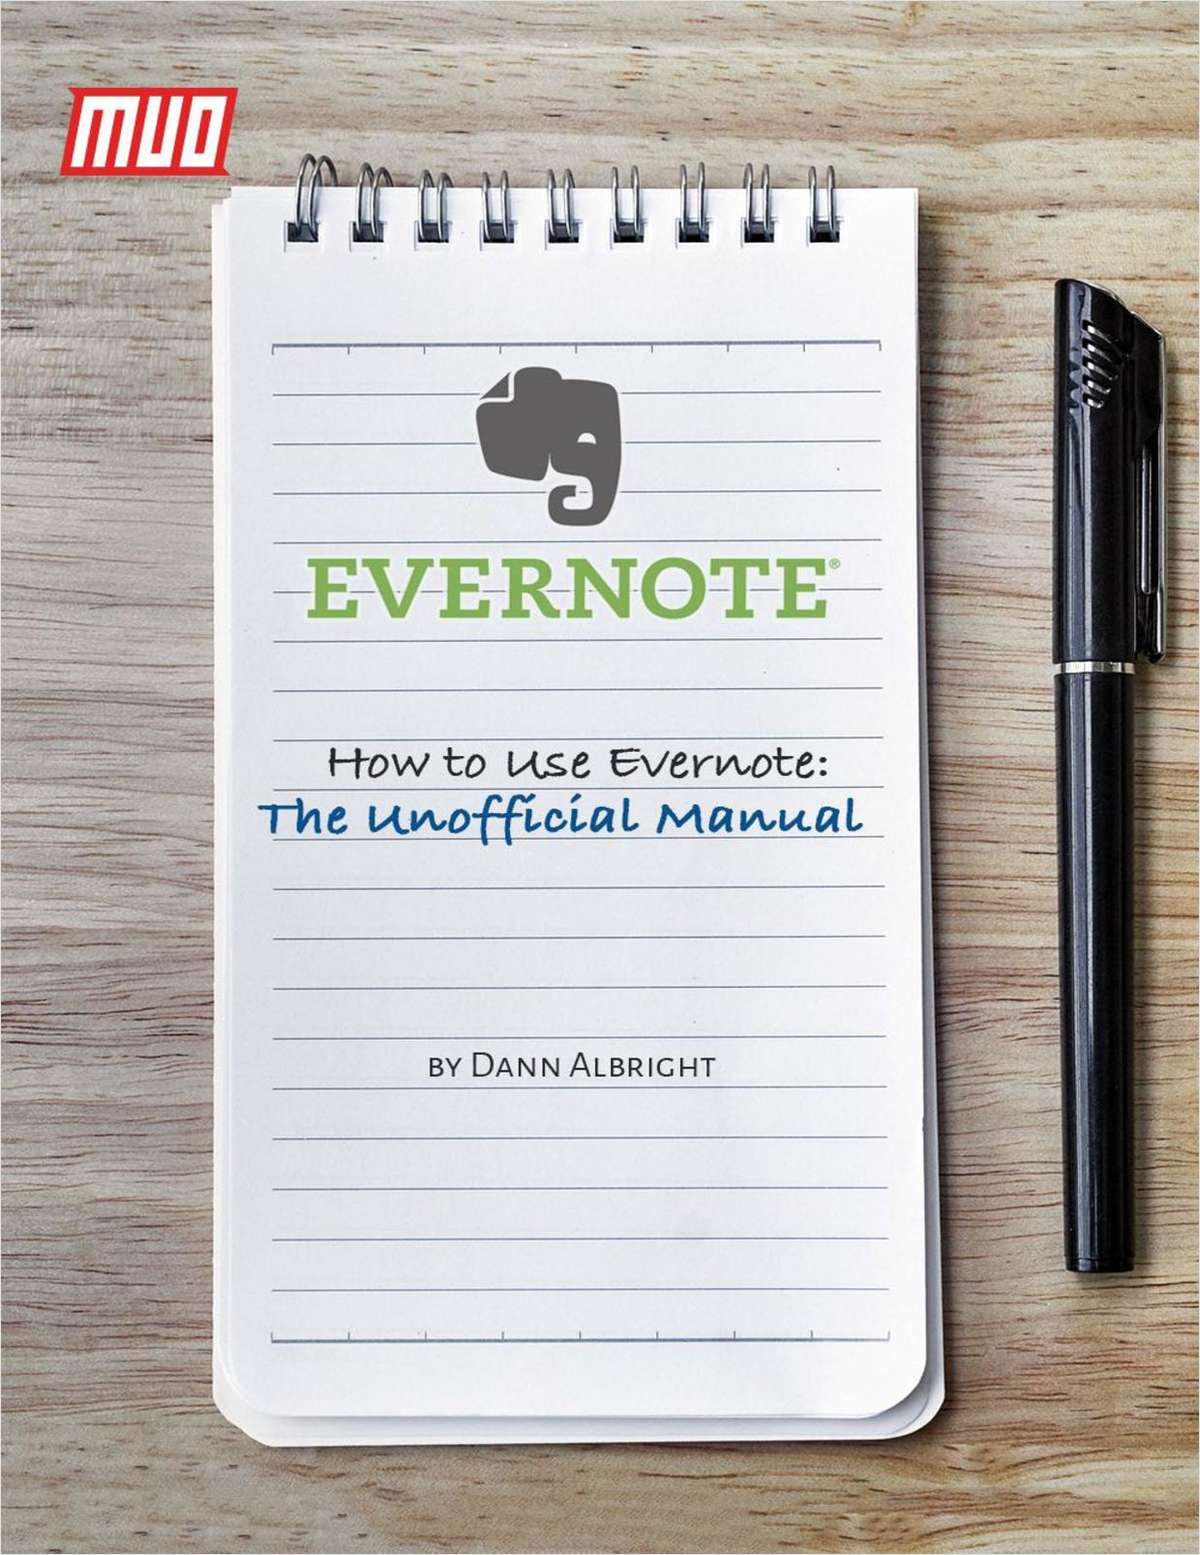 How to Use Evernote: The Unofficial Manual